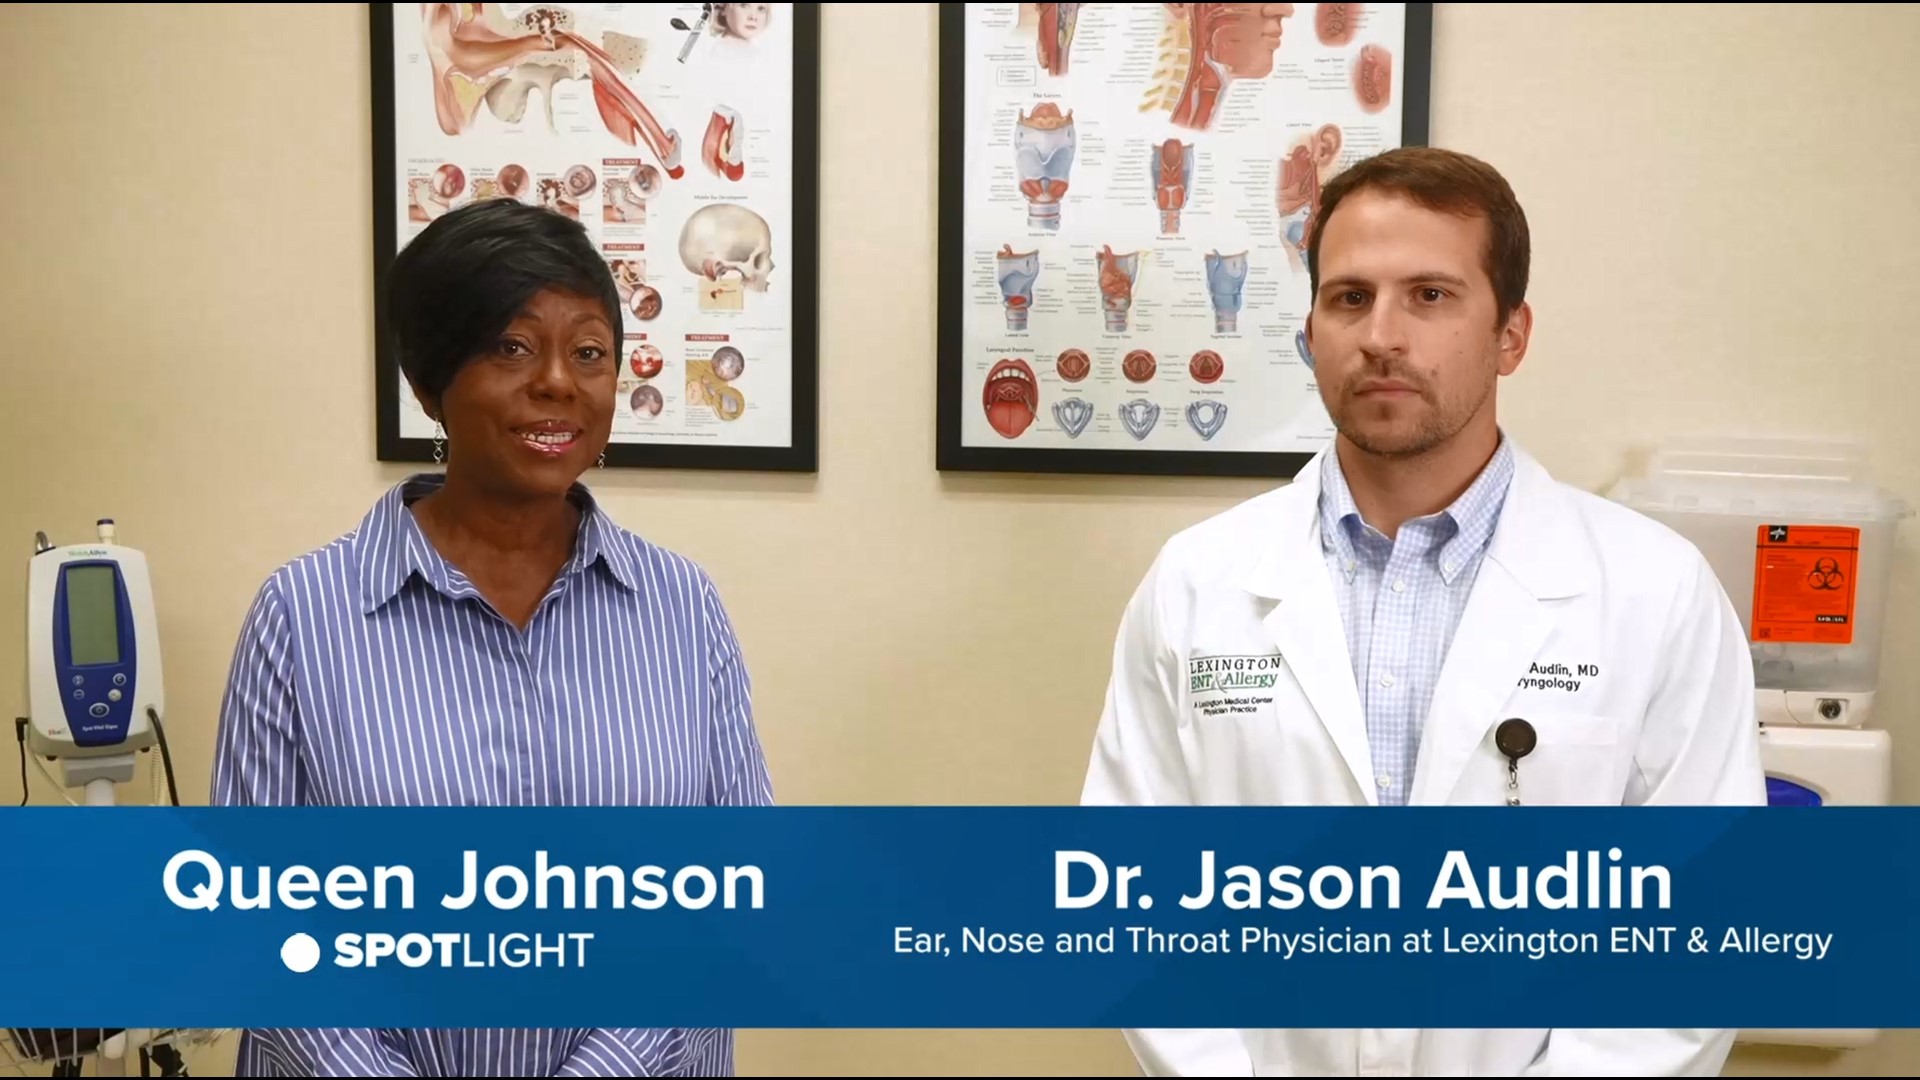 Dr. Jason Audlin, ear, nose and throat physician with Lexington ENT & Allergy, talks about ear infections.